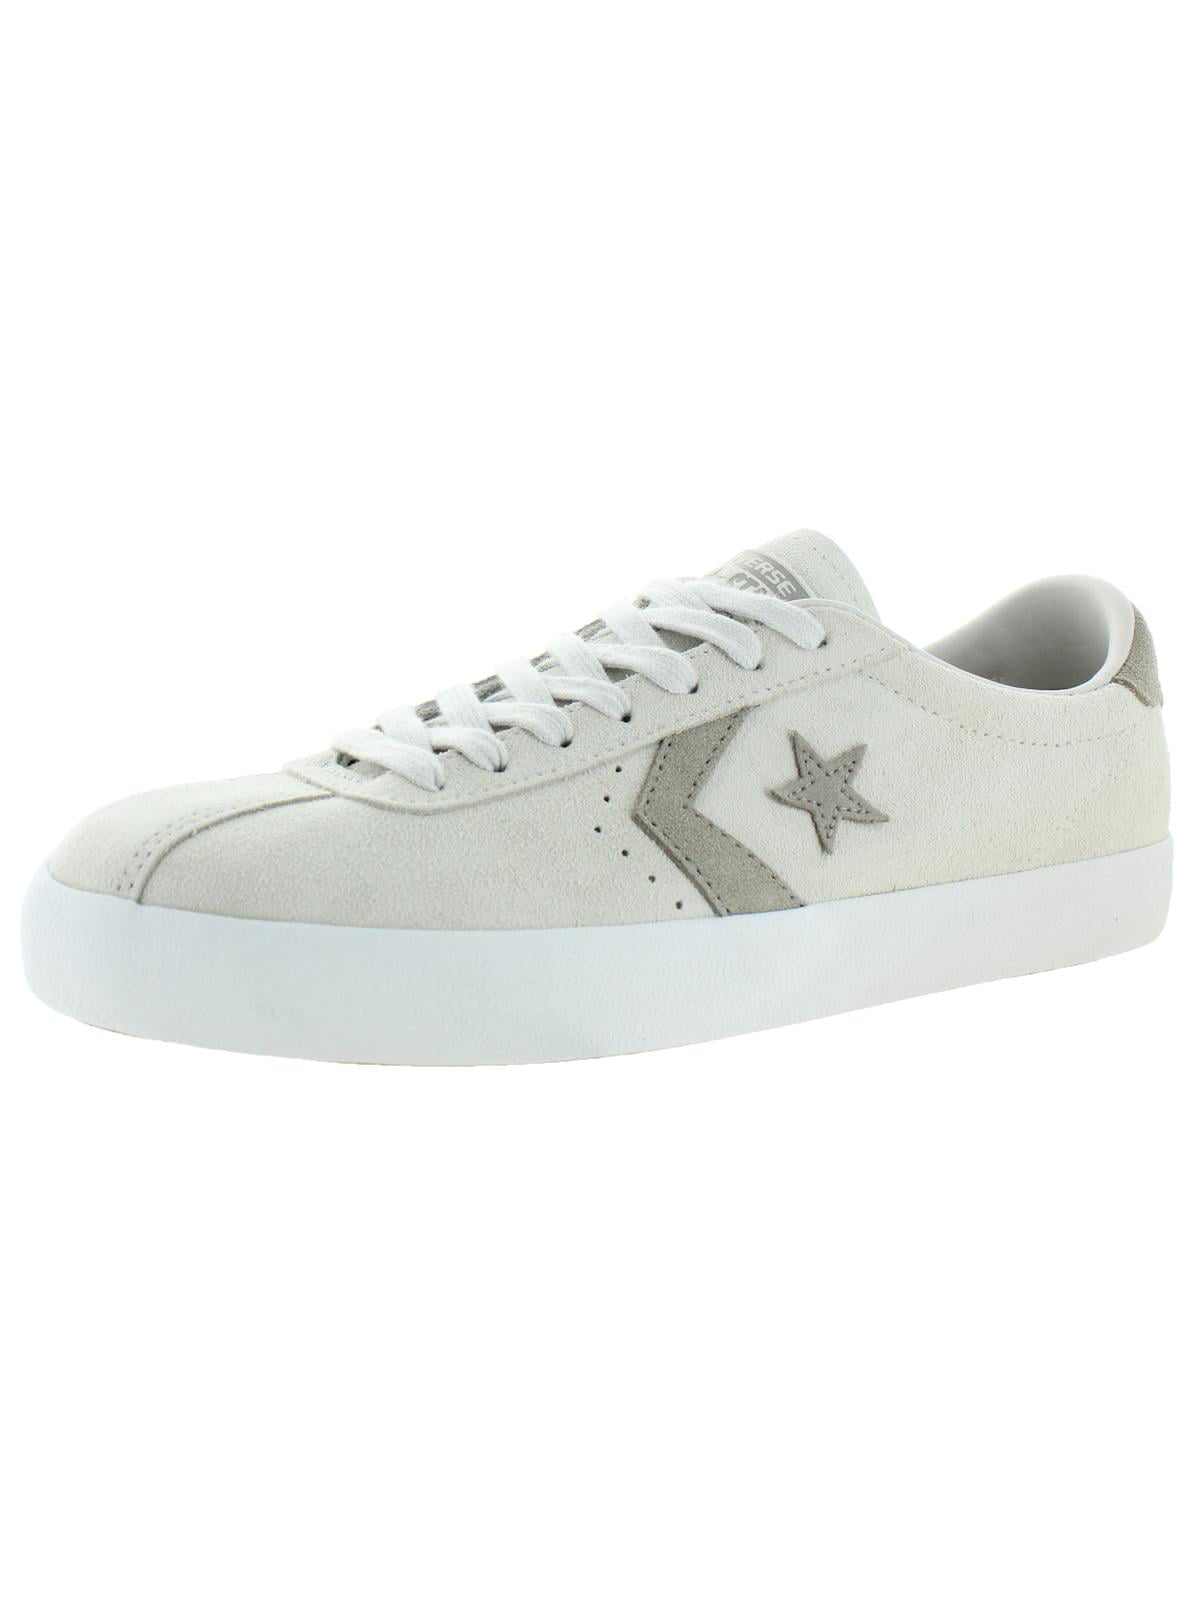 Converse Mens Breakpoint Ox Trainers 